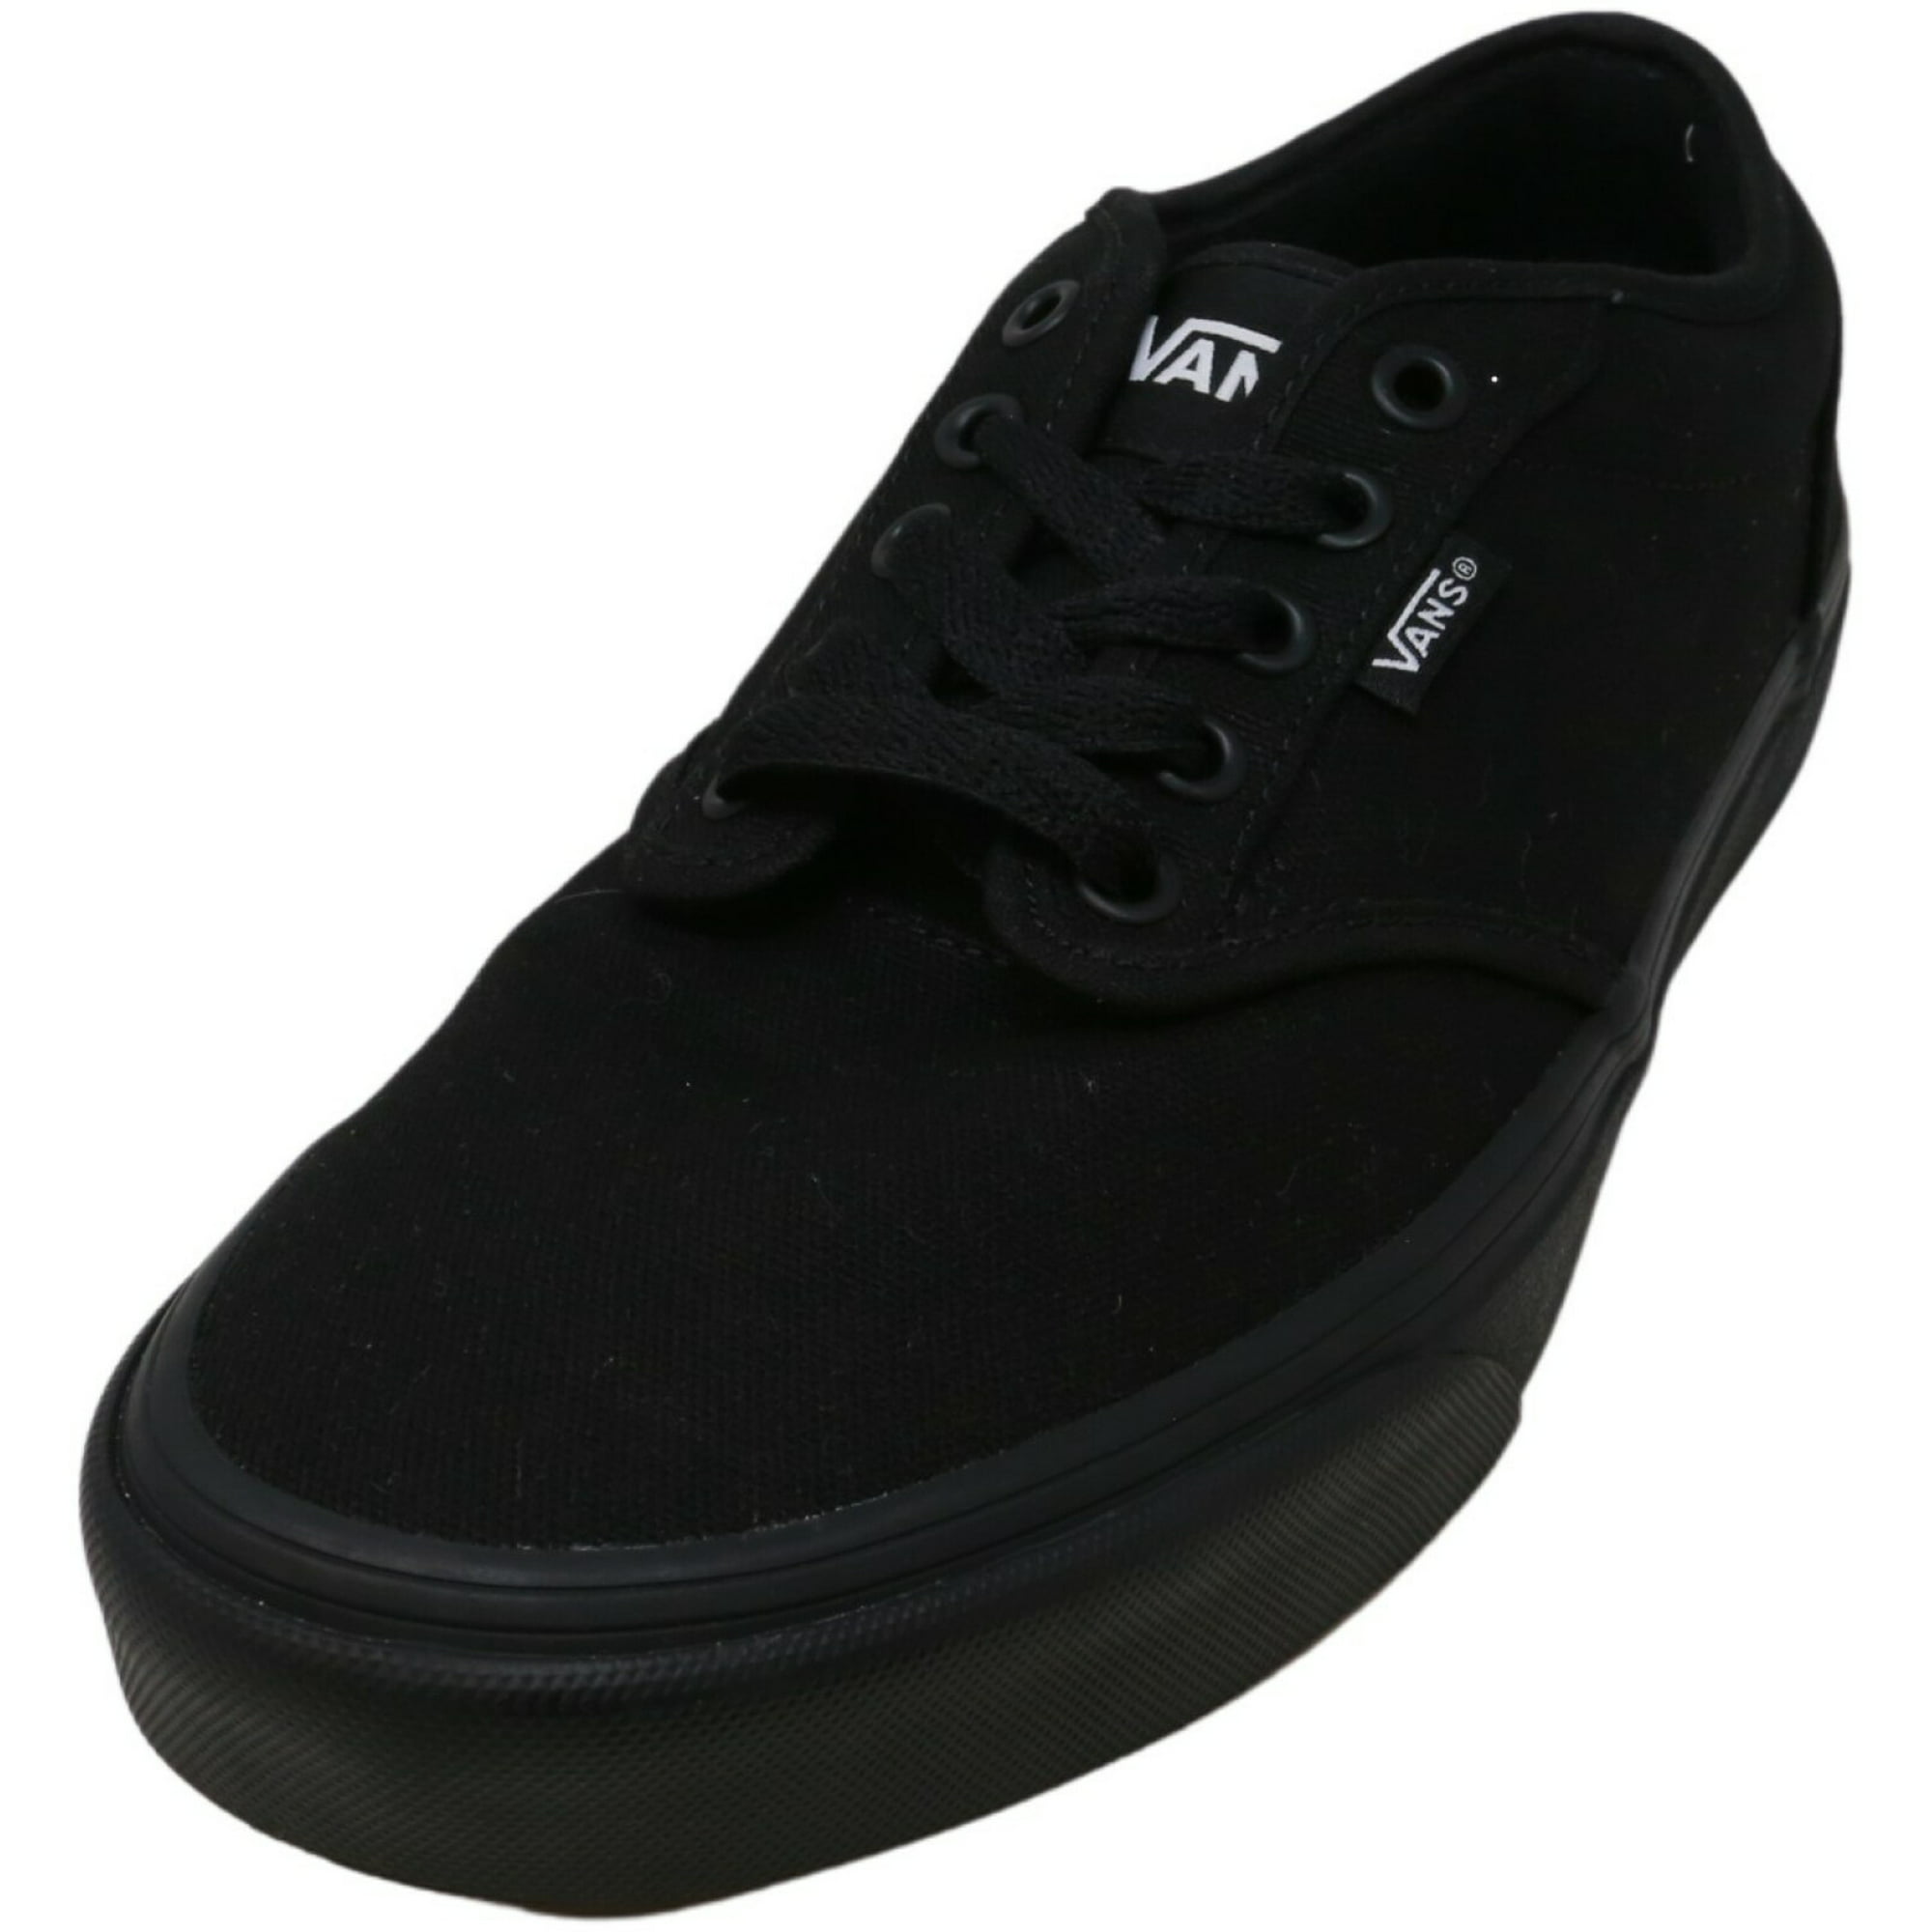 budget om Dronning Vans Atwood Black/Black Canvas Skate/Casual ( VN-0TUY186 ) - Walmart.com